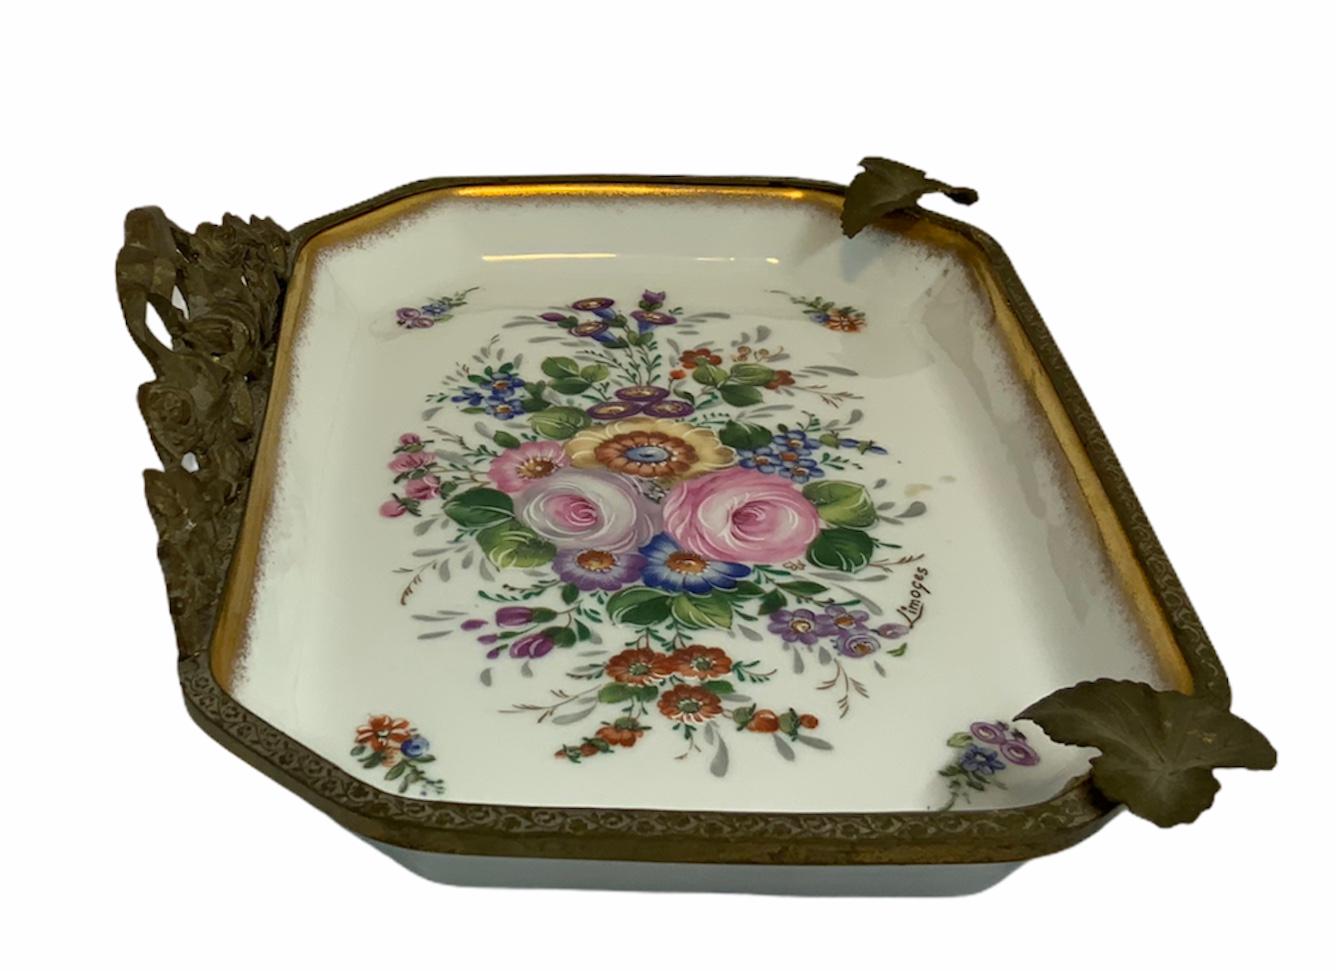 Ancienne Manufacture Royale et Imperiale de Porcelaines Bronze Porcelain Tray In Good Condition For Sale In Guaynabo, PR